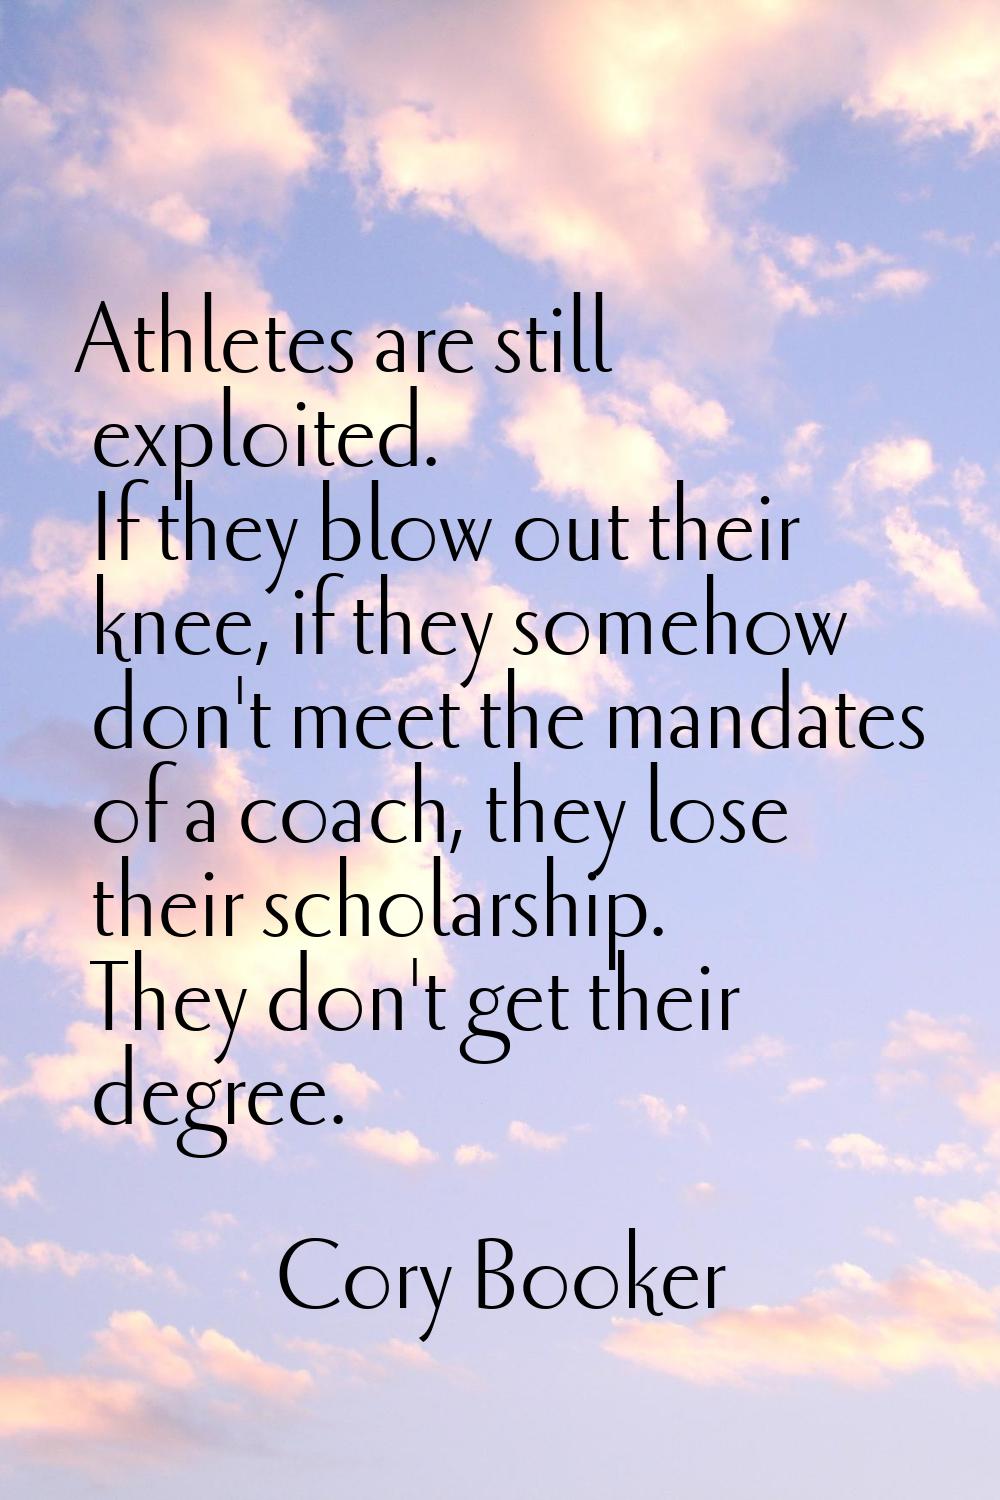 Athletes are still exploited. If they blow out their knee, if they somehow don't meet the mandates 